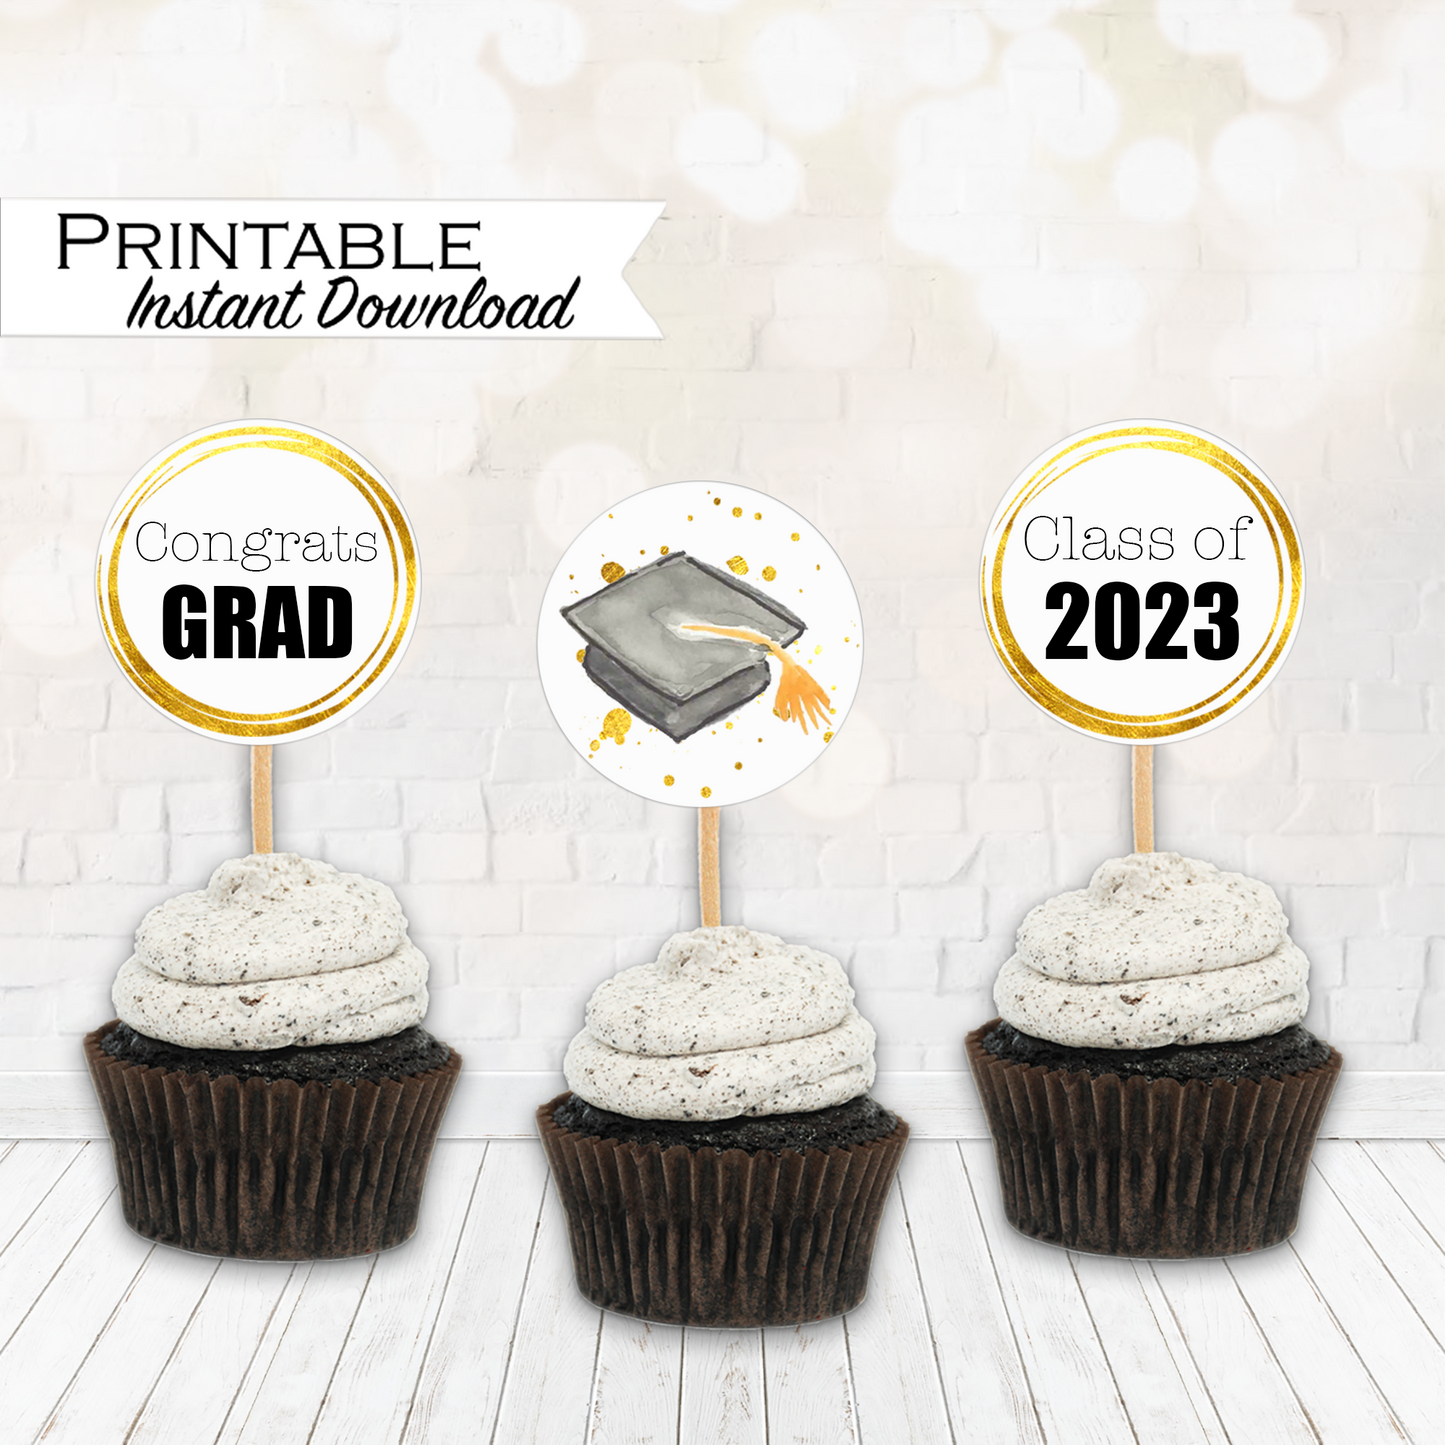 Graduation Cap Watercolor Printable Stationery - Unlined & Lined Stationery Set